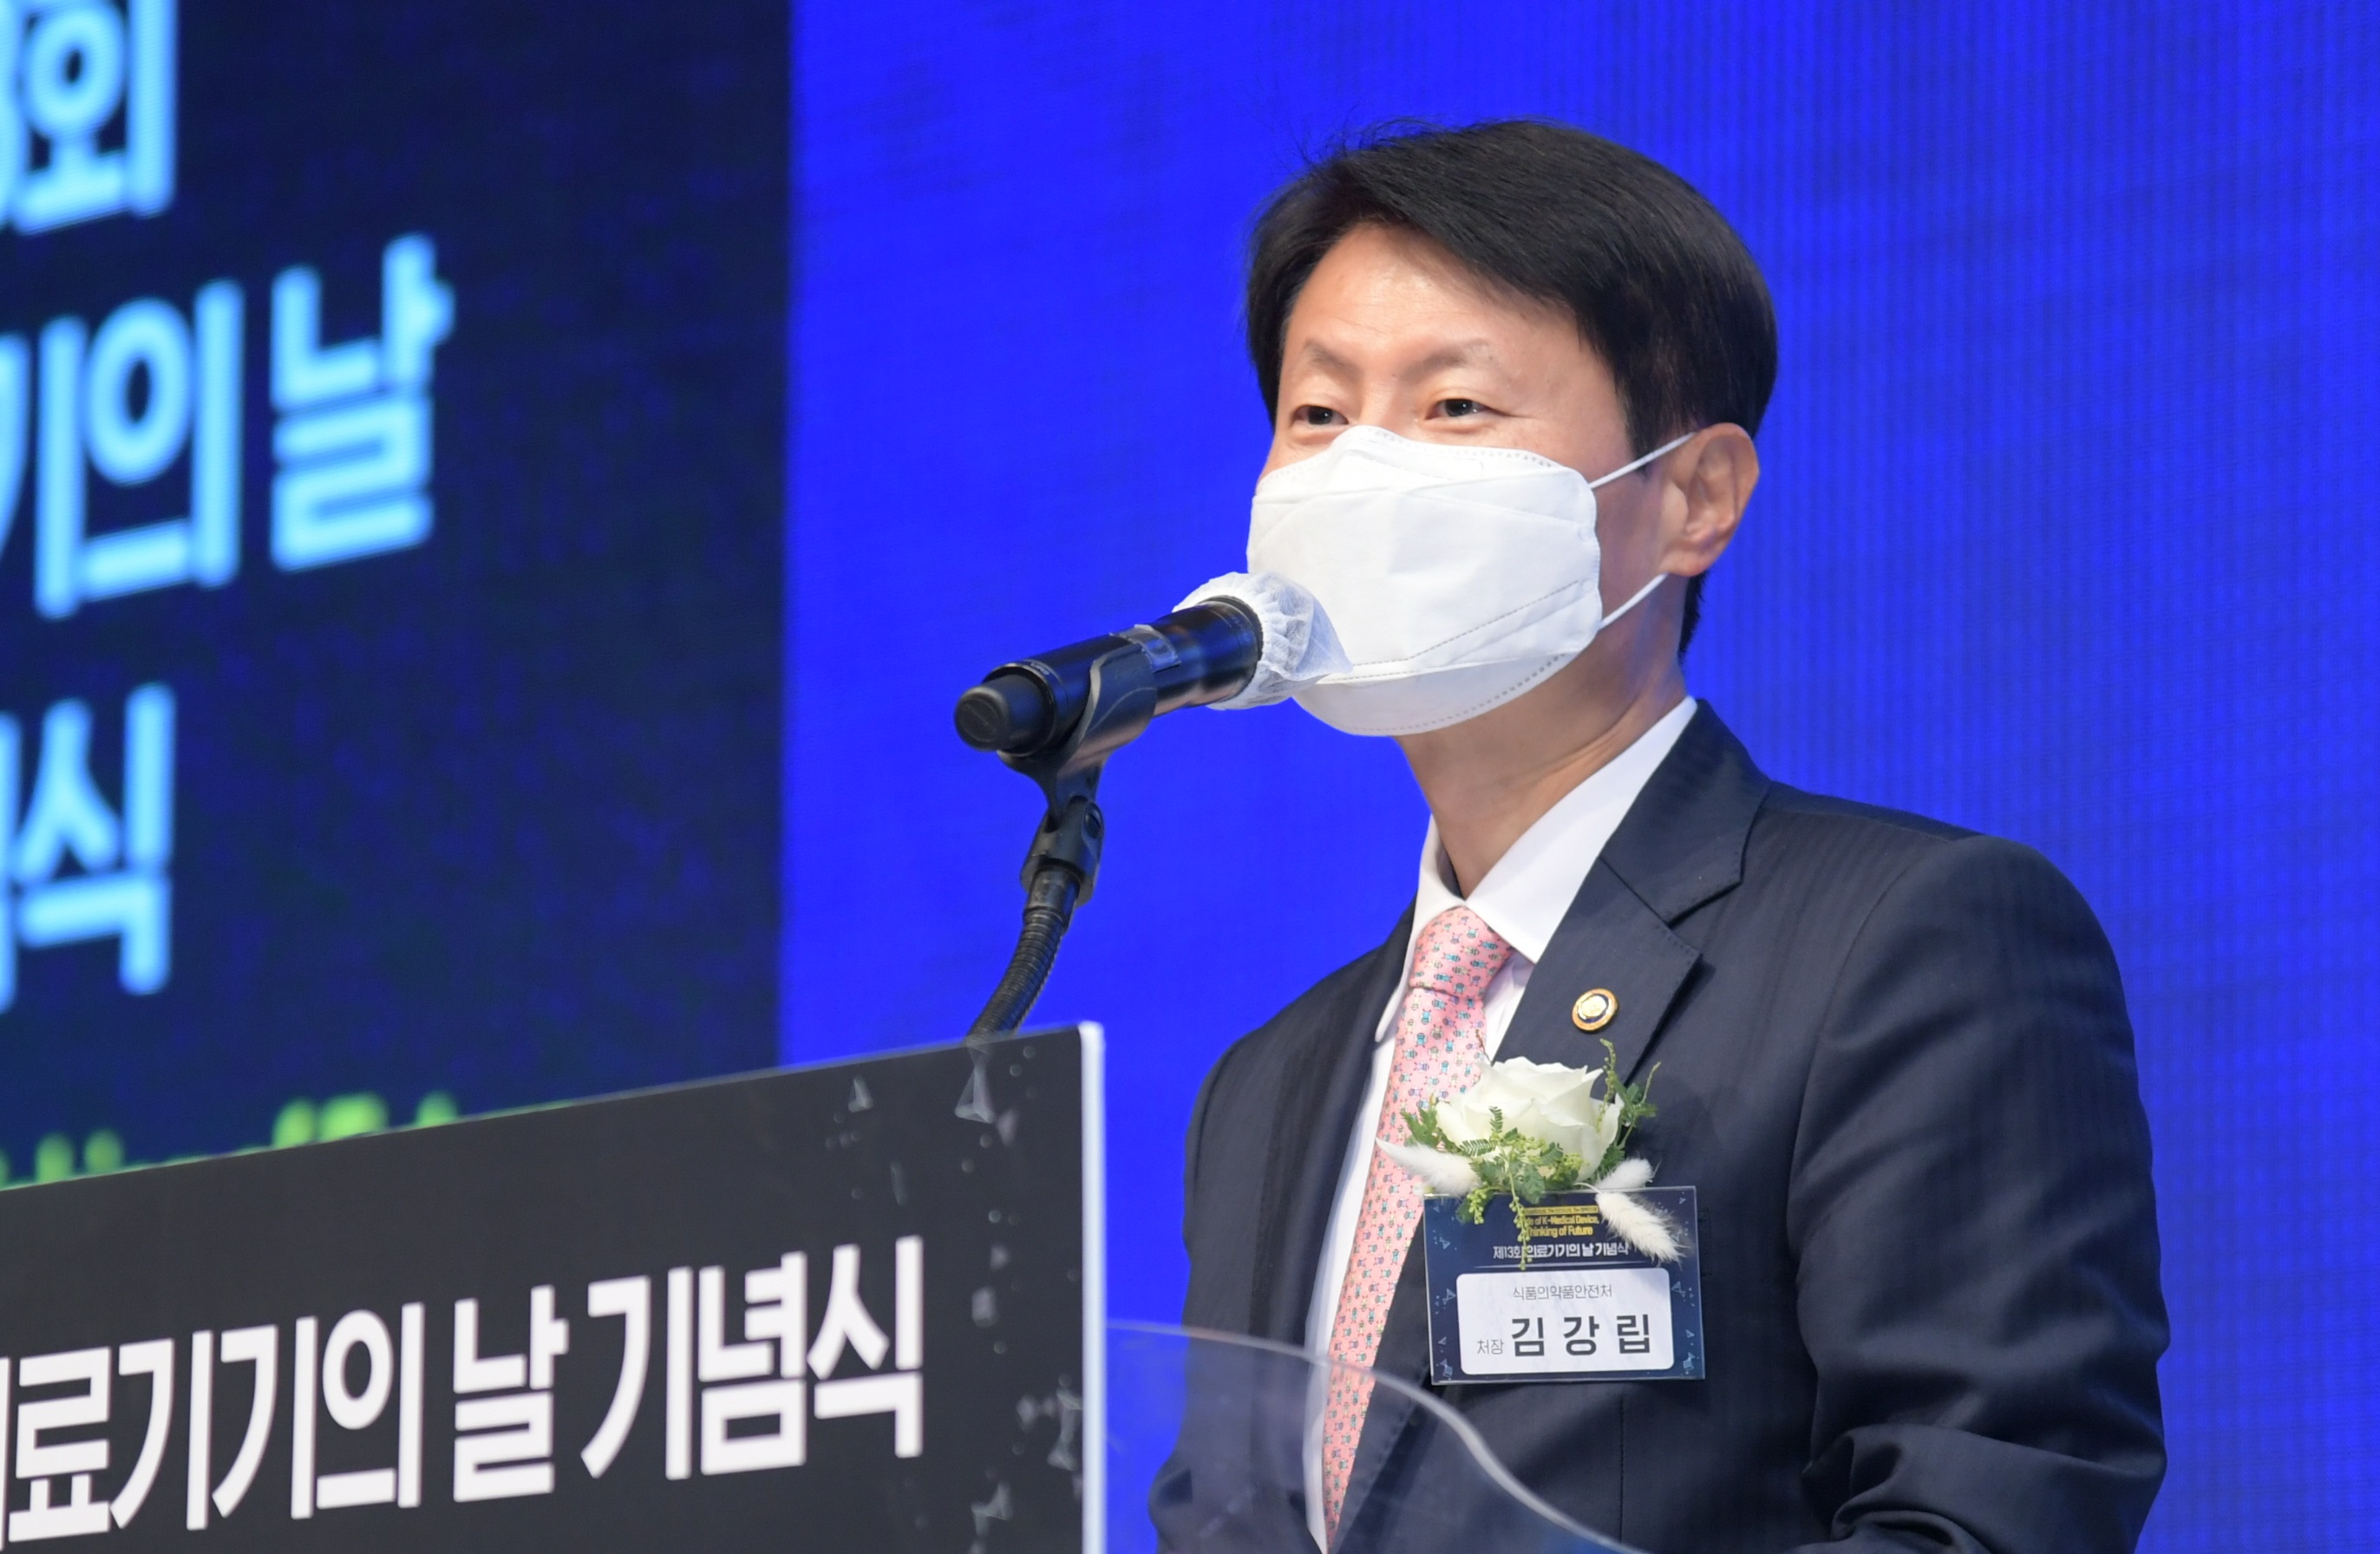 [Nov. 20, 2020] A Commemorative Ceremony of the 13th Day of Medical Device